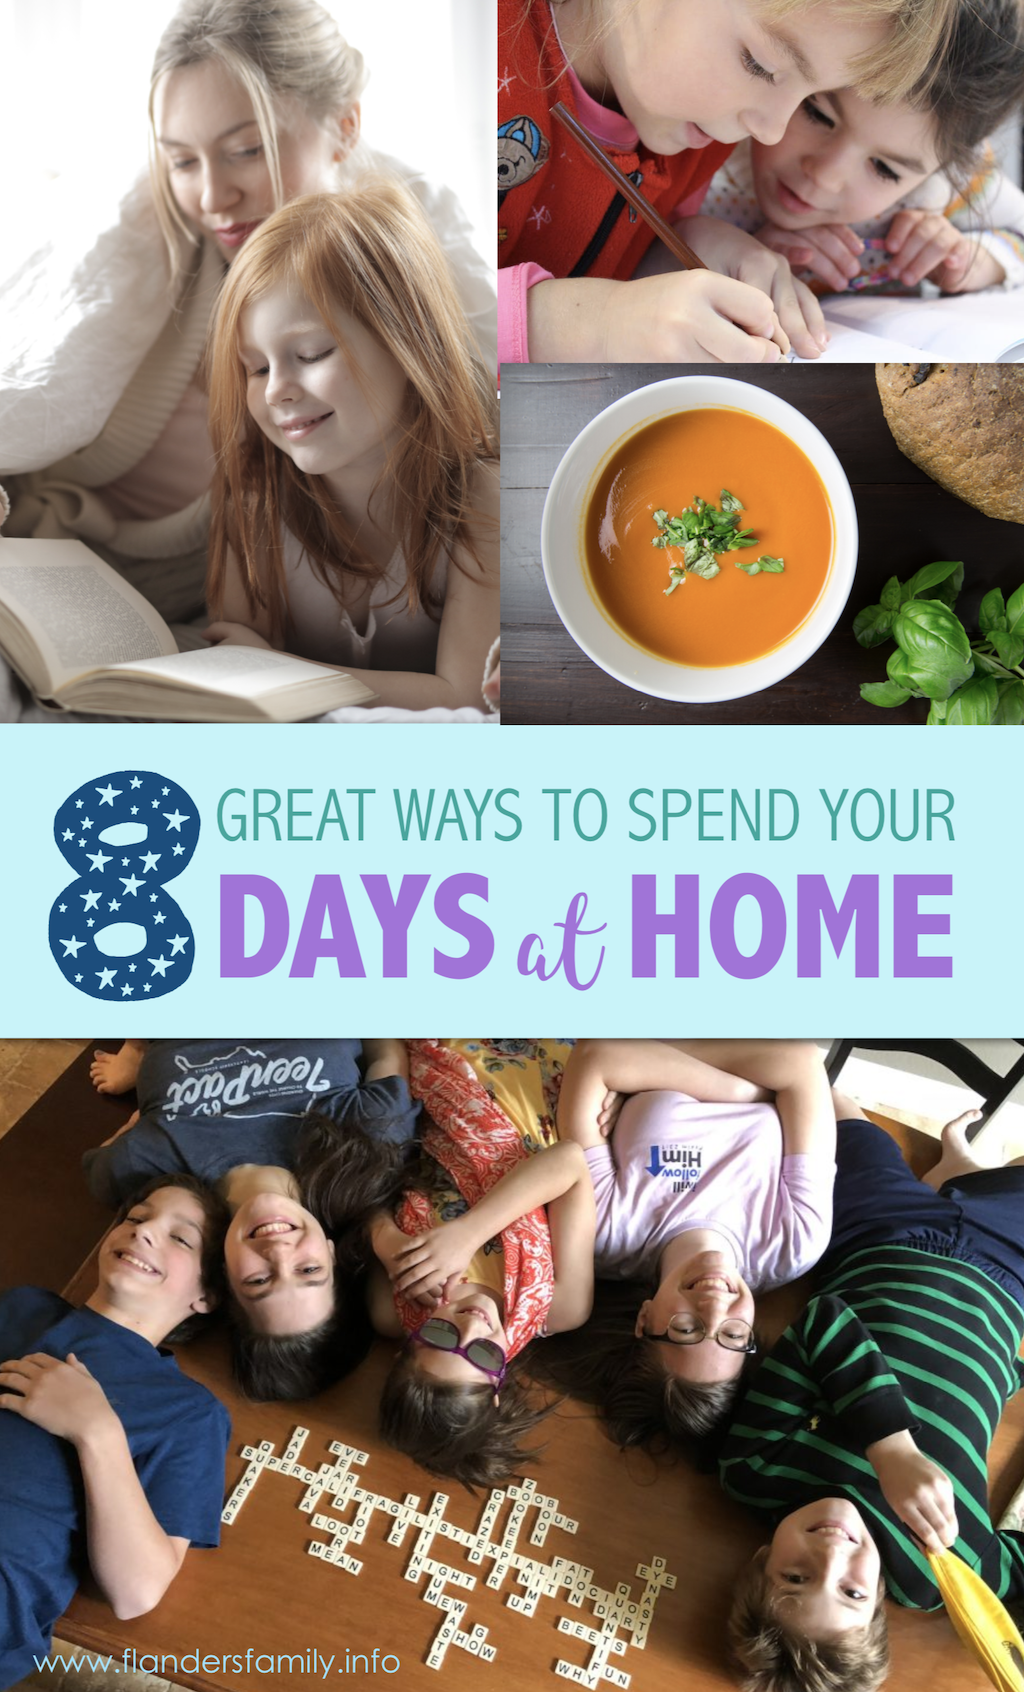 8 Great Ways to Spend Your Days 